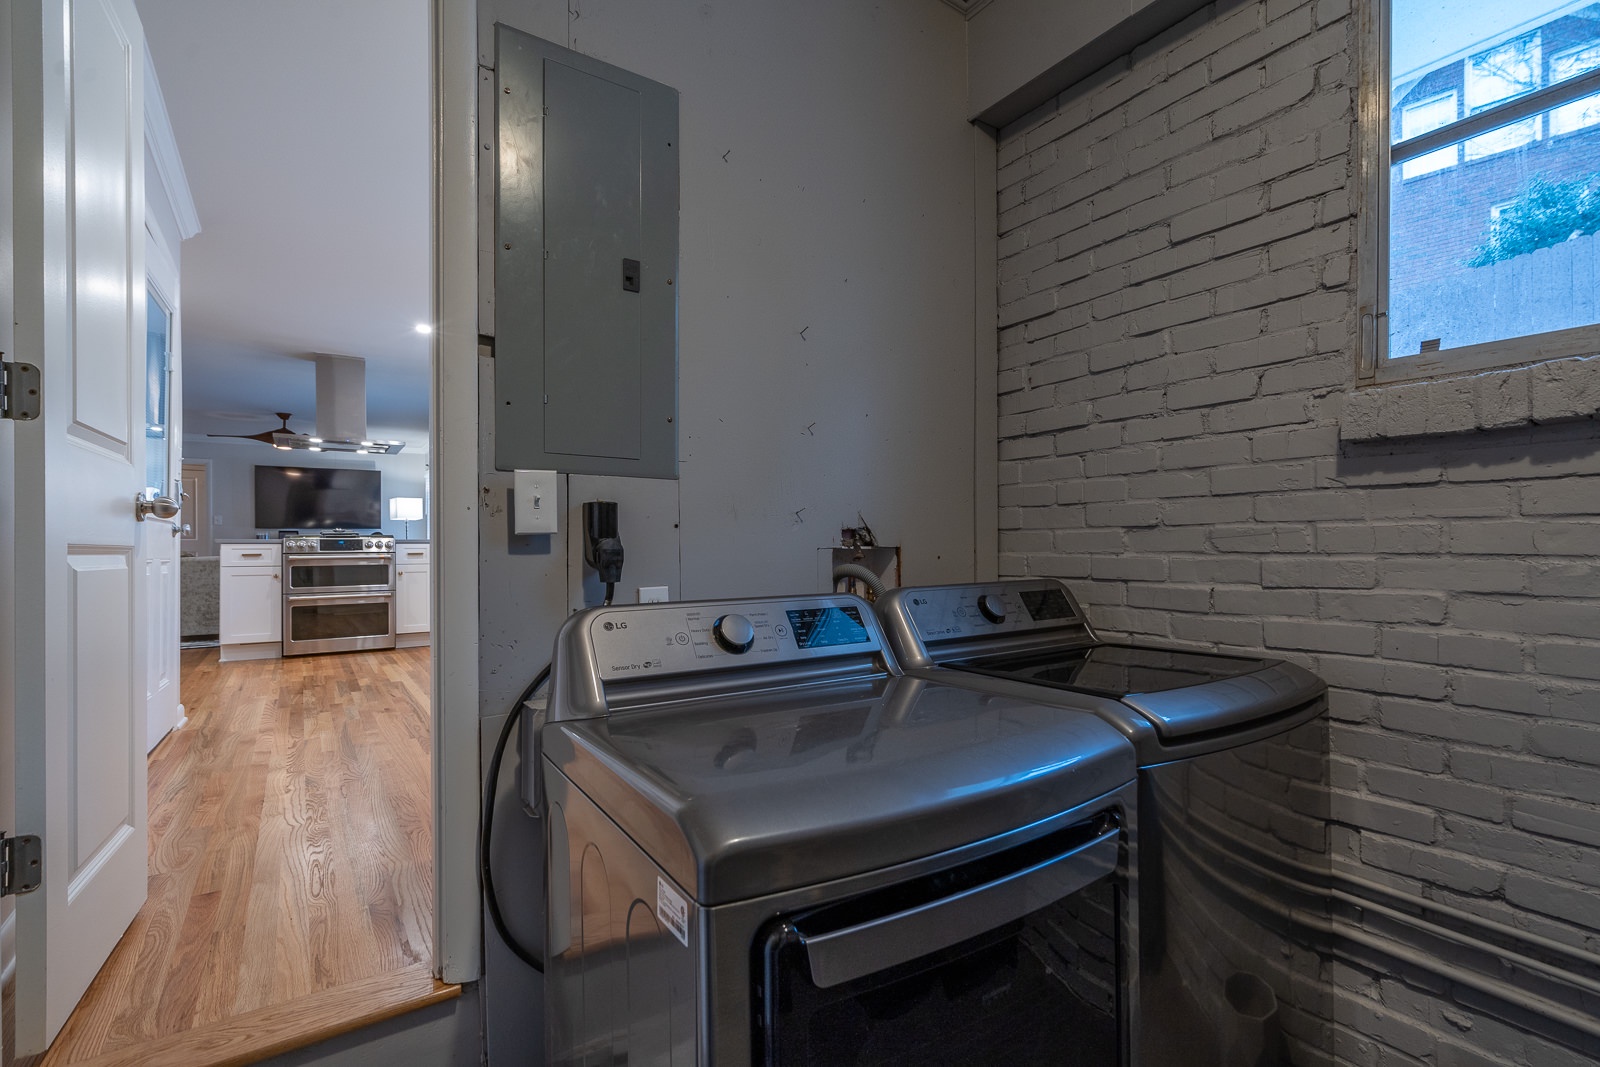 Laundry area accessible in home